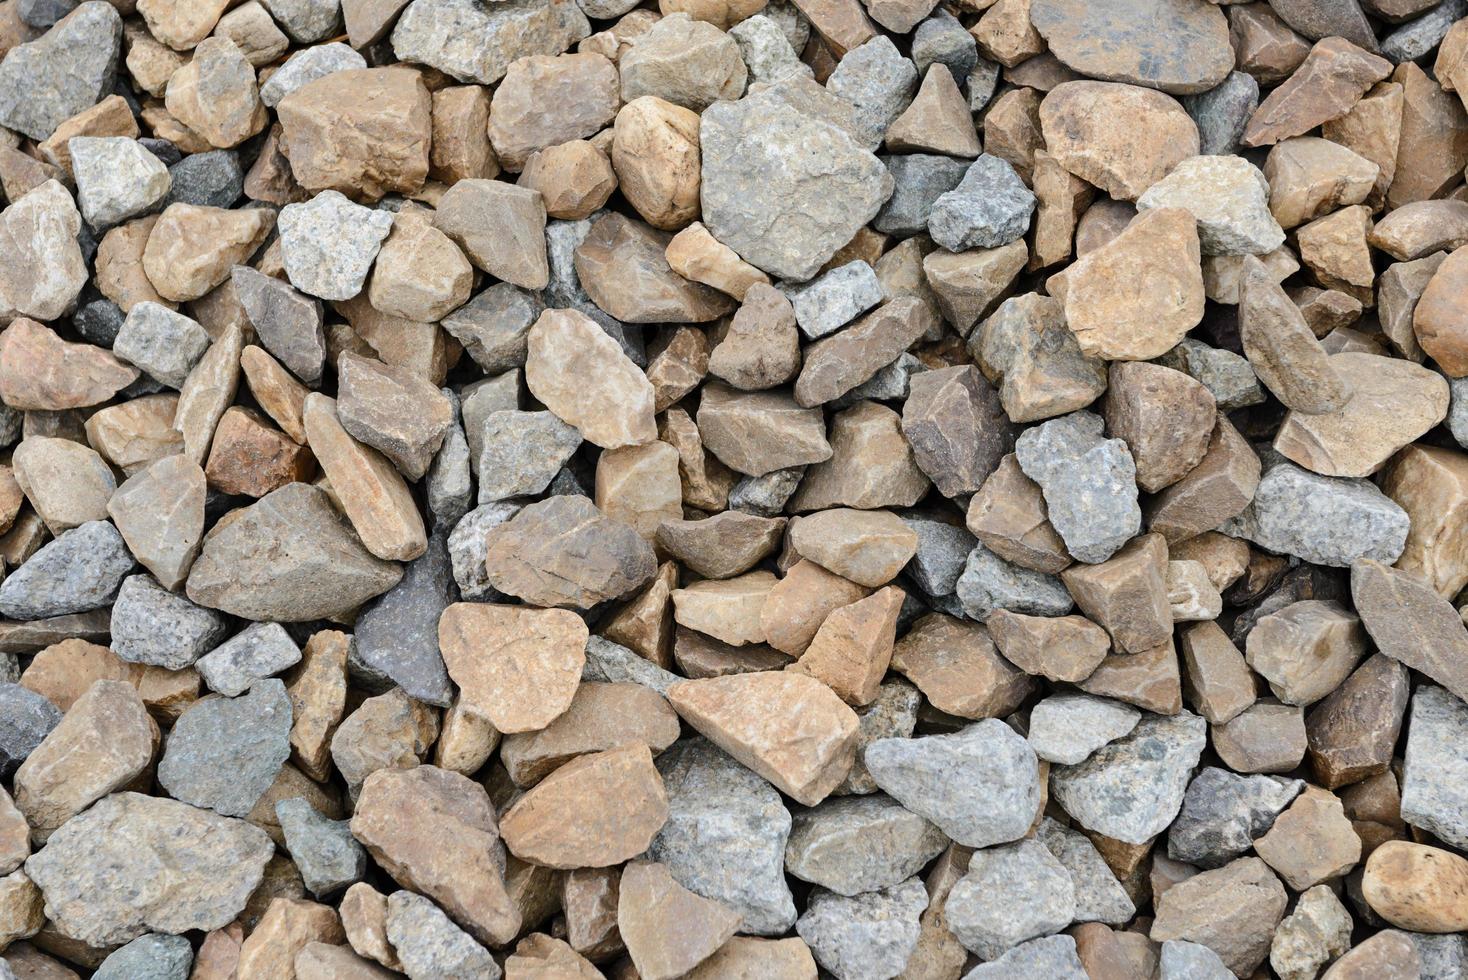 Rough gravel rock found at some Railroad tracks - texture, background photo